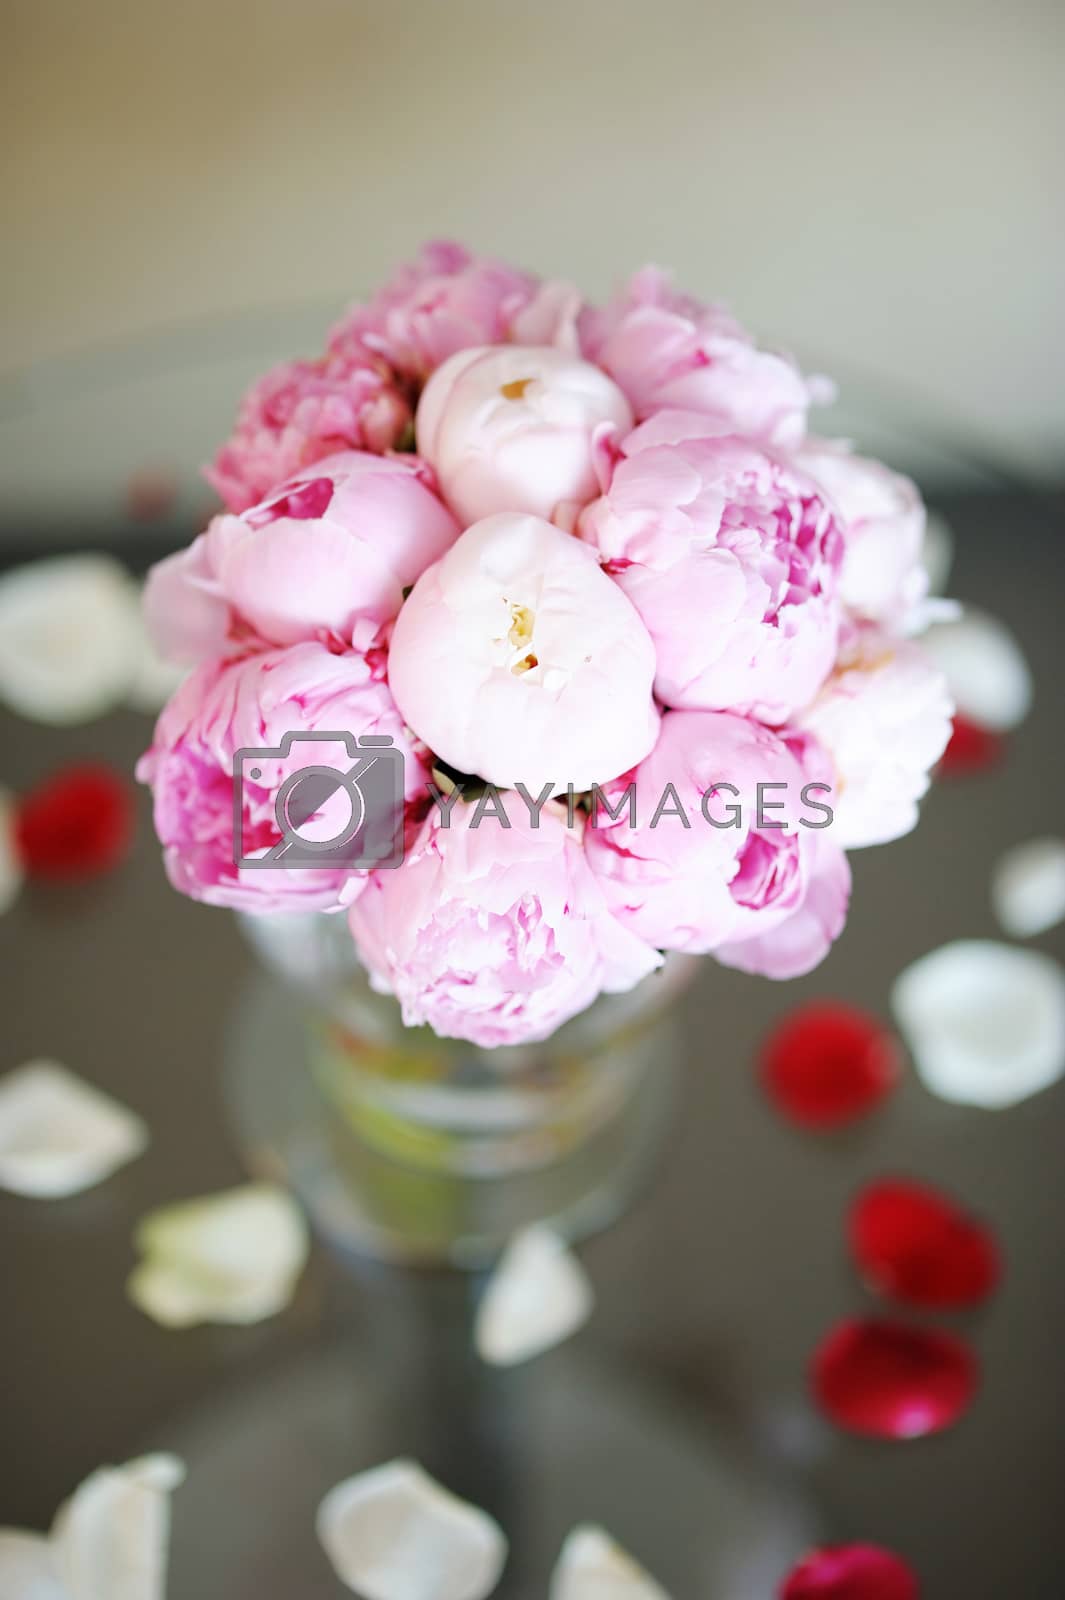 Royalty free image of Bridal bouquet by maximkabb